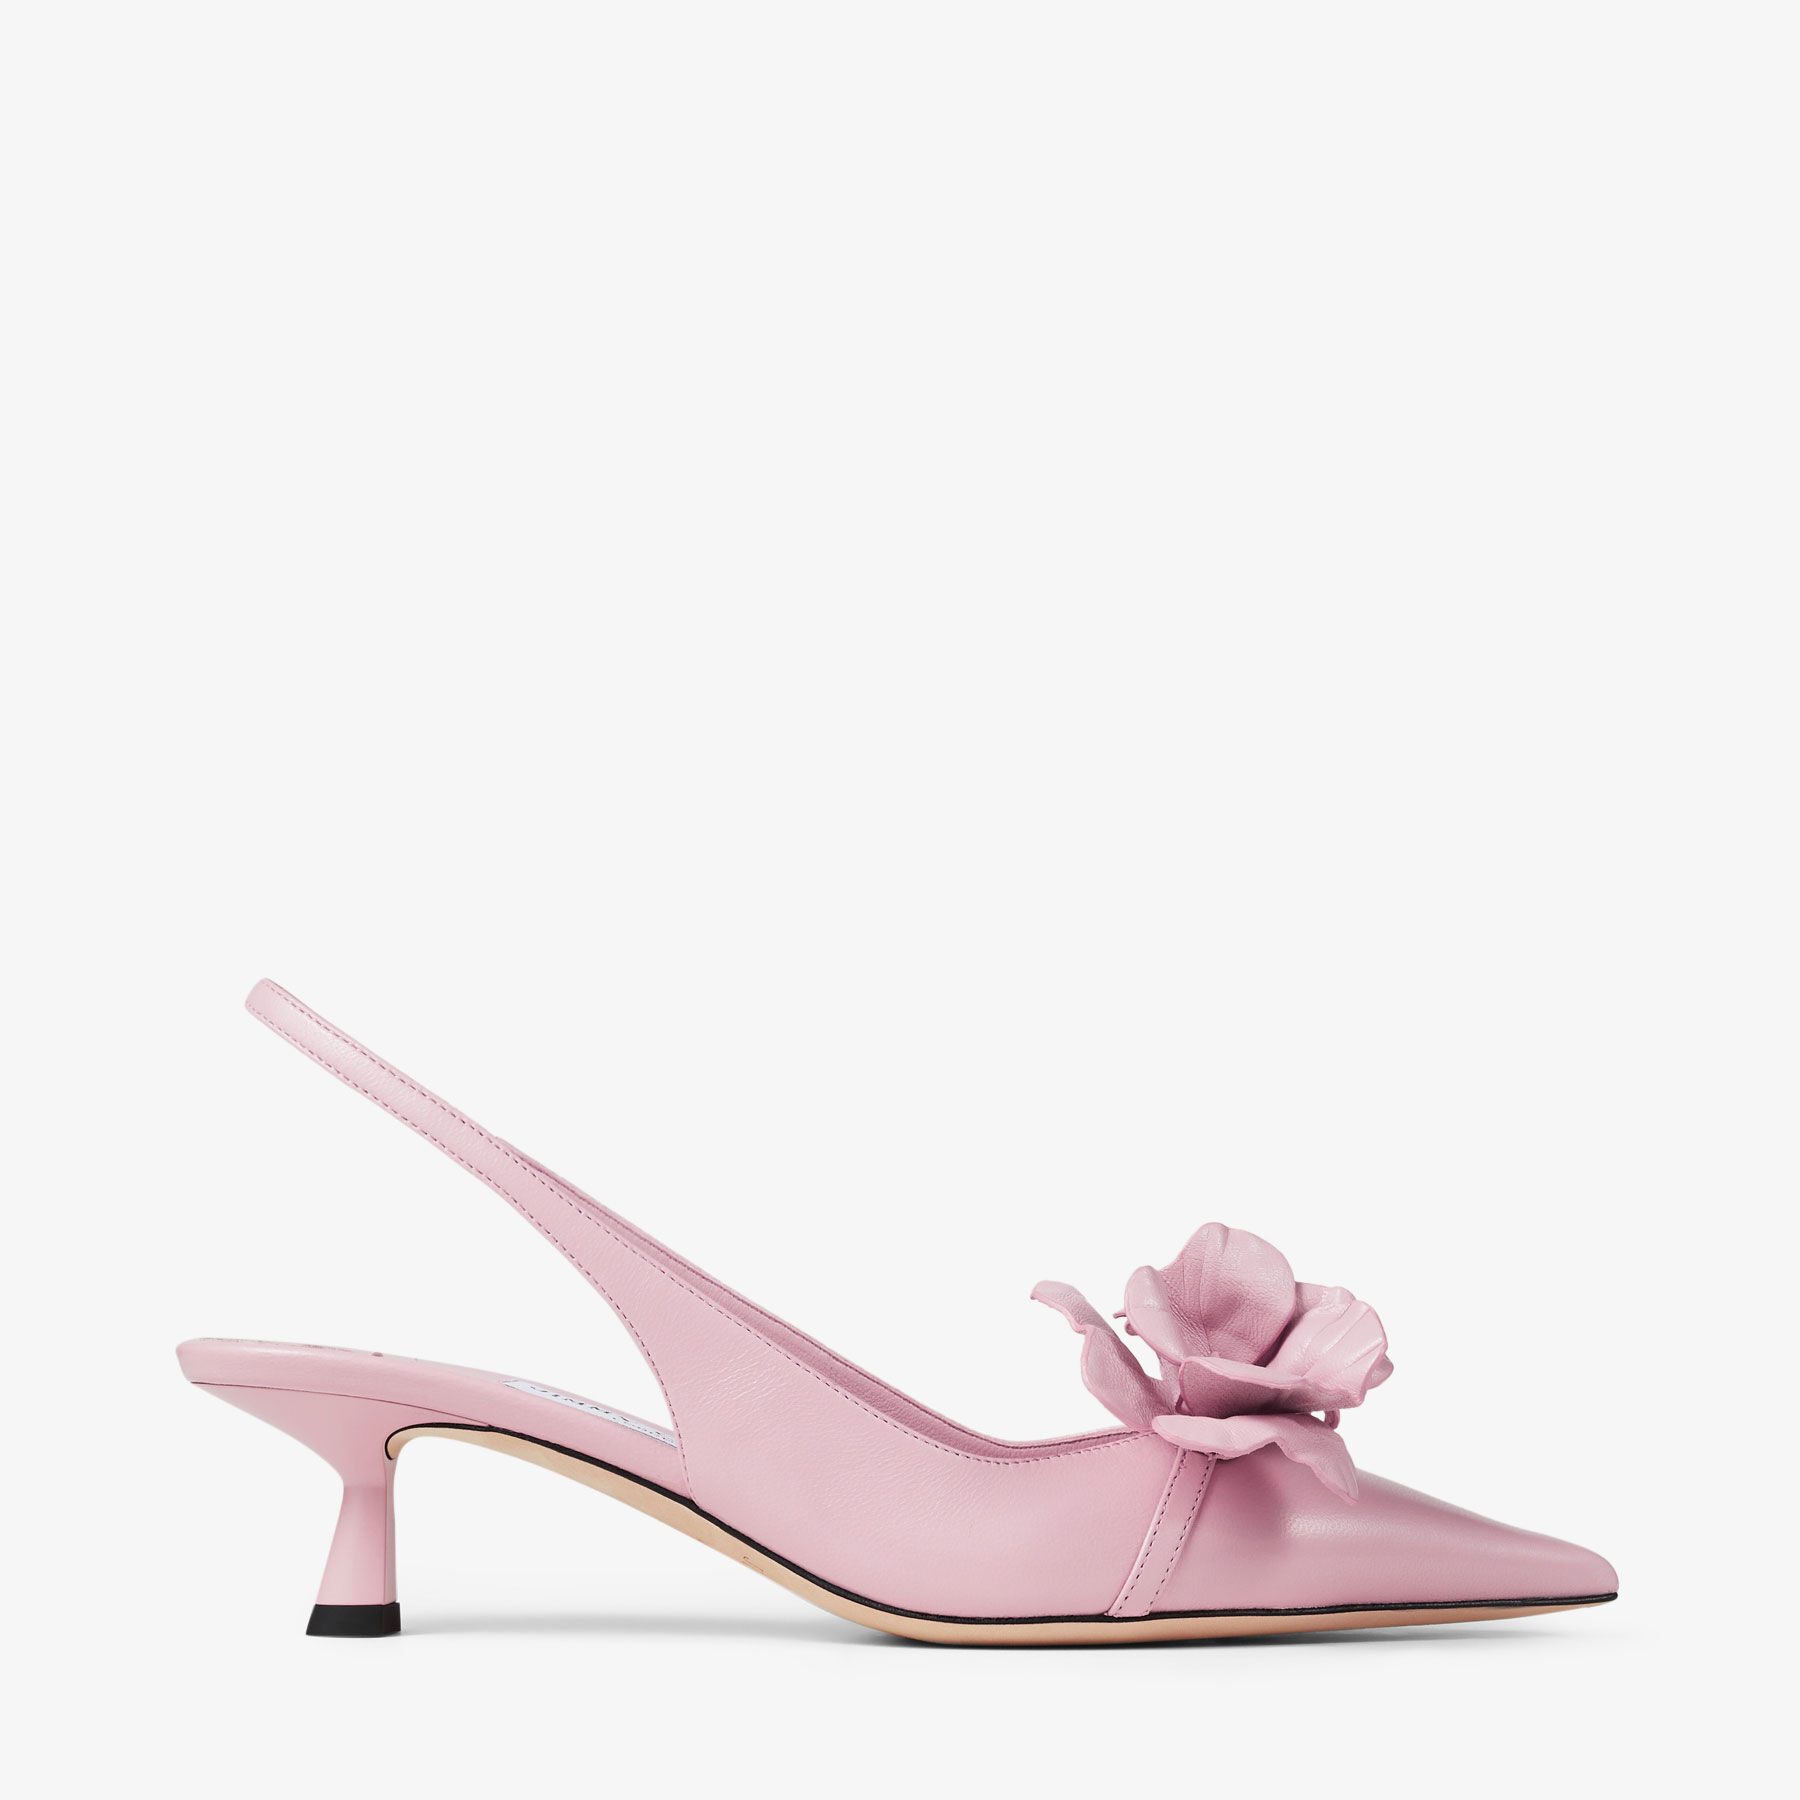 AMITA/FLOWERS 45 | Rose Nappa Leather Sling Back Pumps with Flowers ...